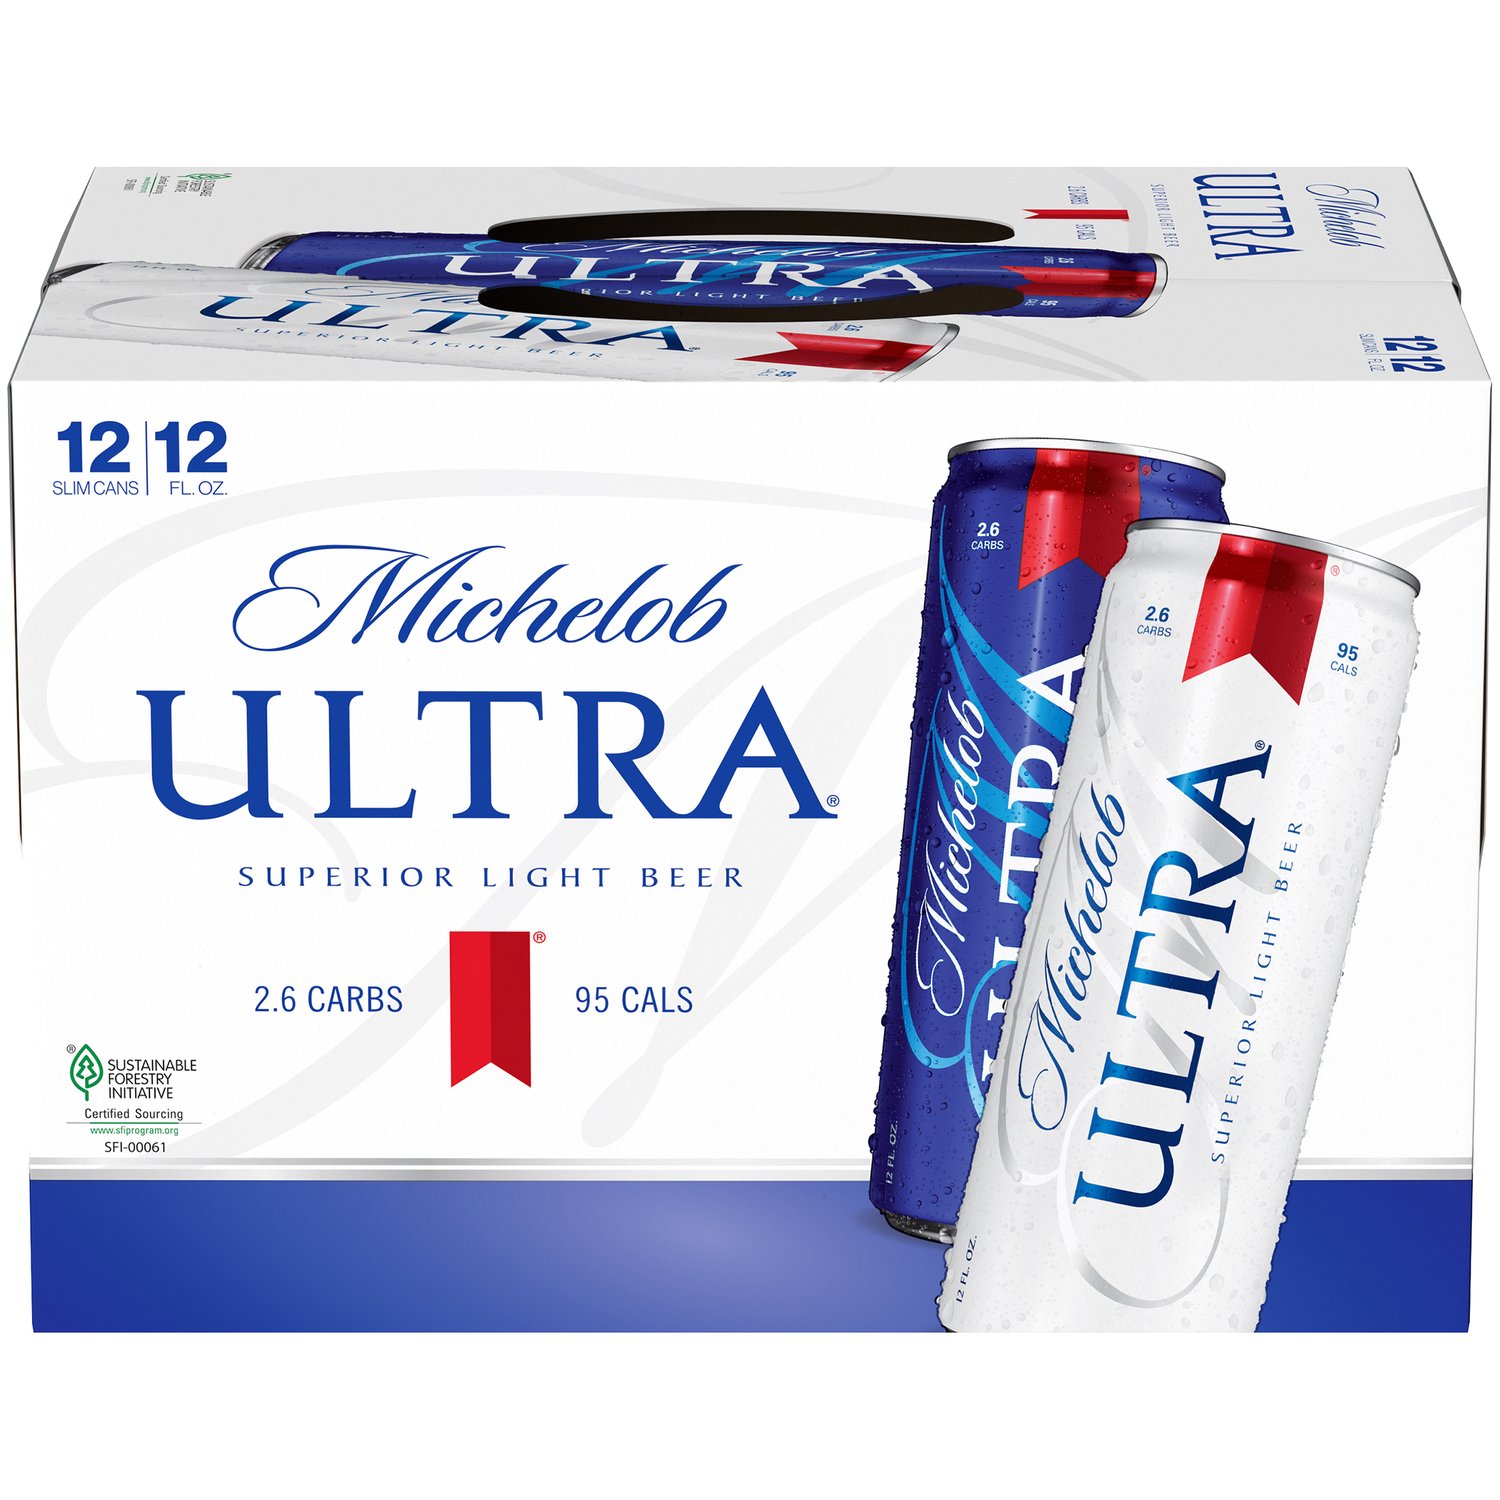 12 Things You Should Know About Michelob Ultra